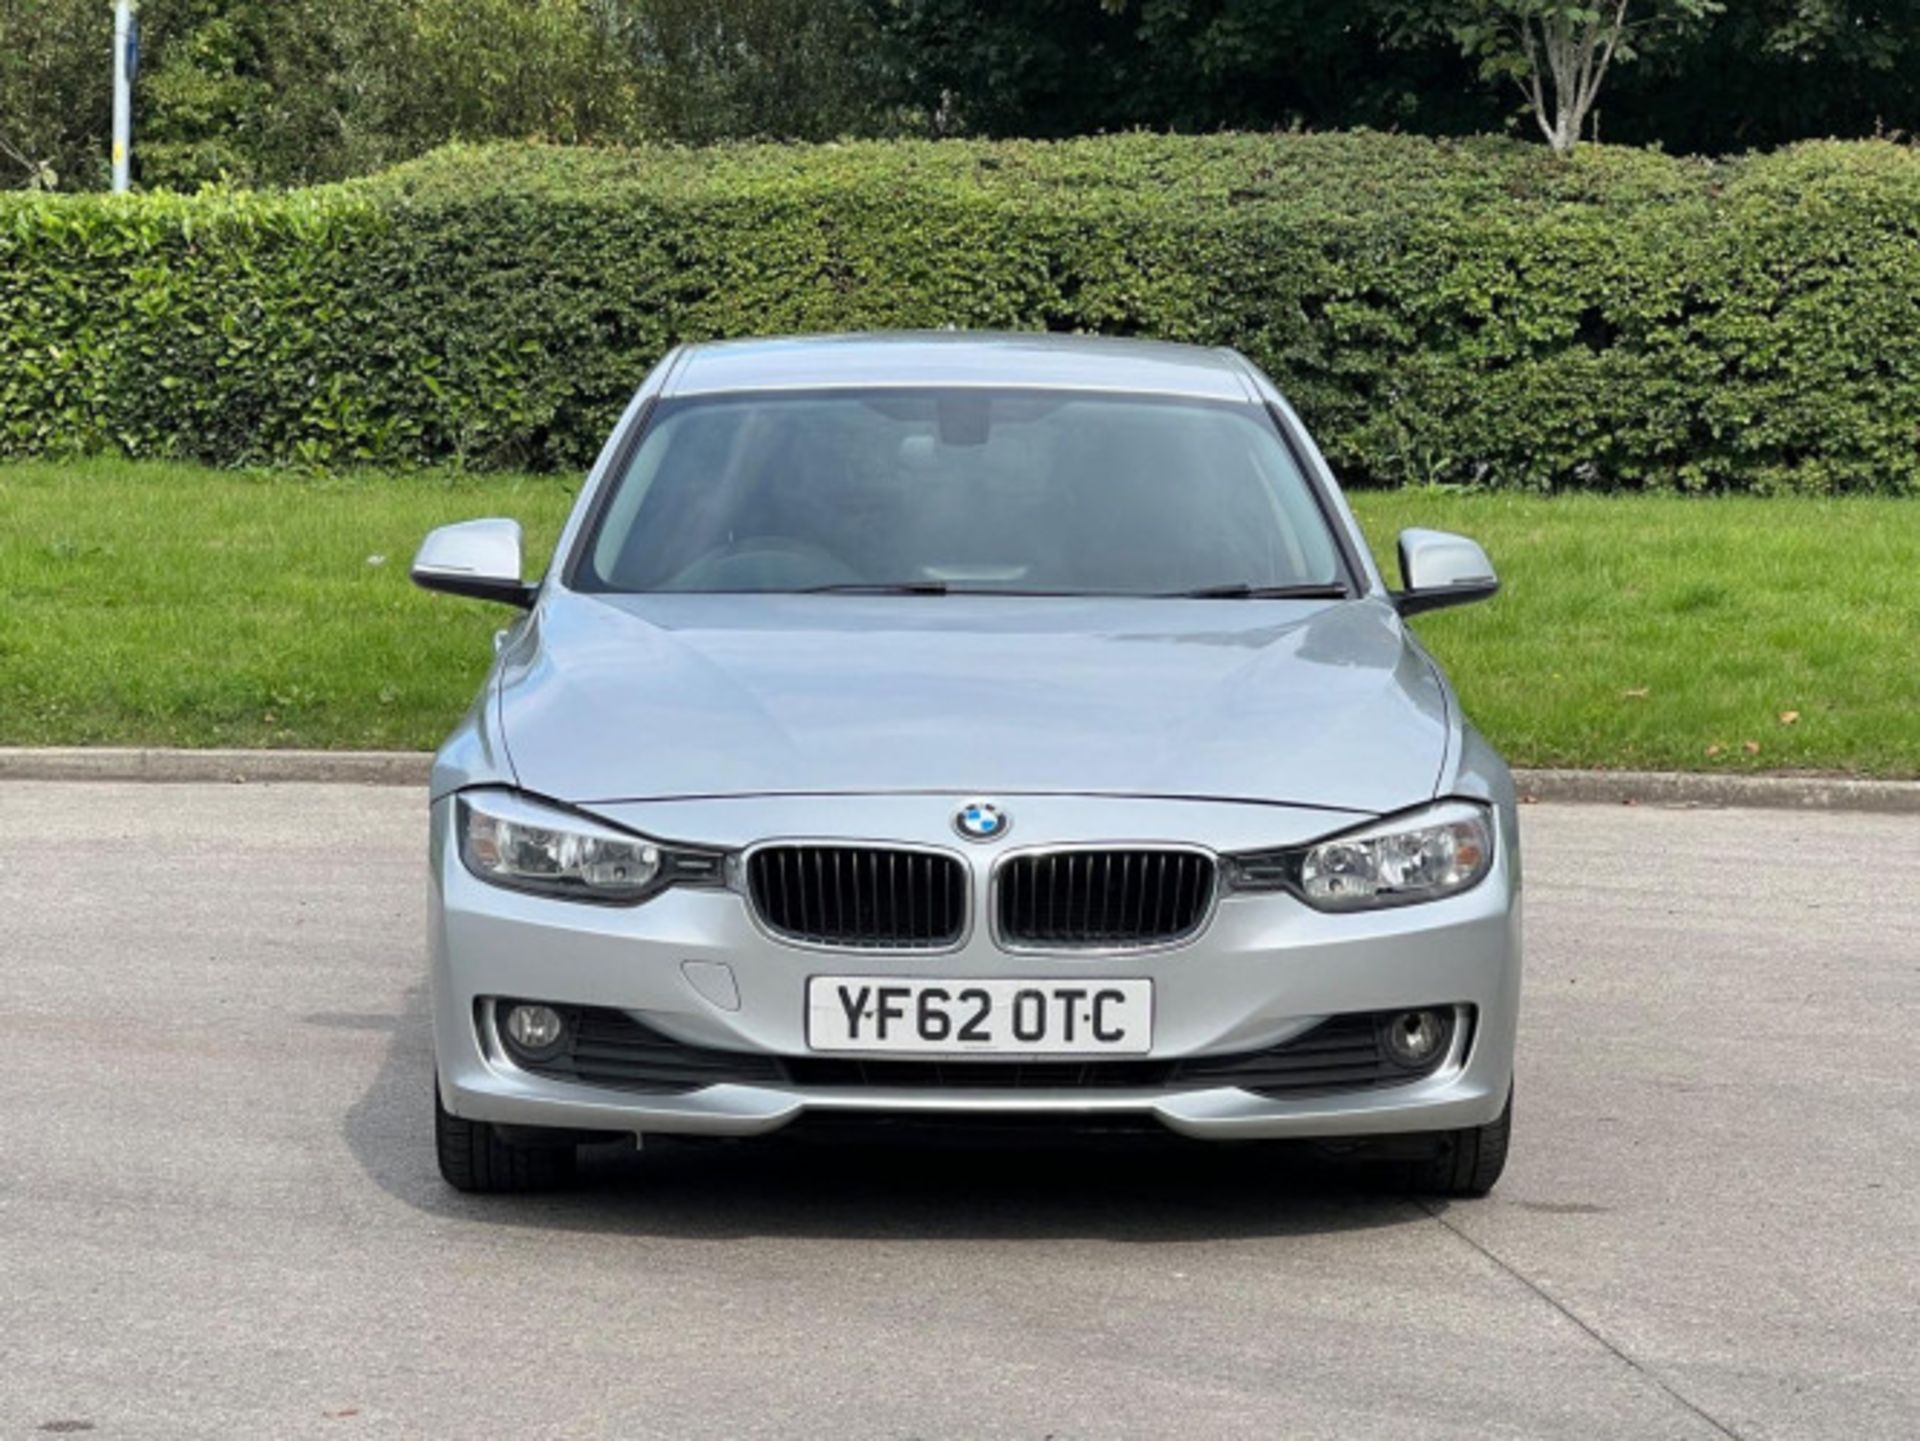 BMW 3 SERIES 2.0 DIESEL ED START STOP - A WELL-MAINTAINED GEM >>--NO VAT ON HAMMER--<< - Image 14 of 229